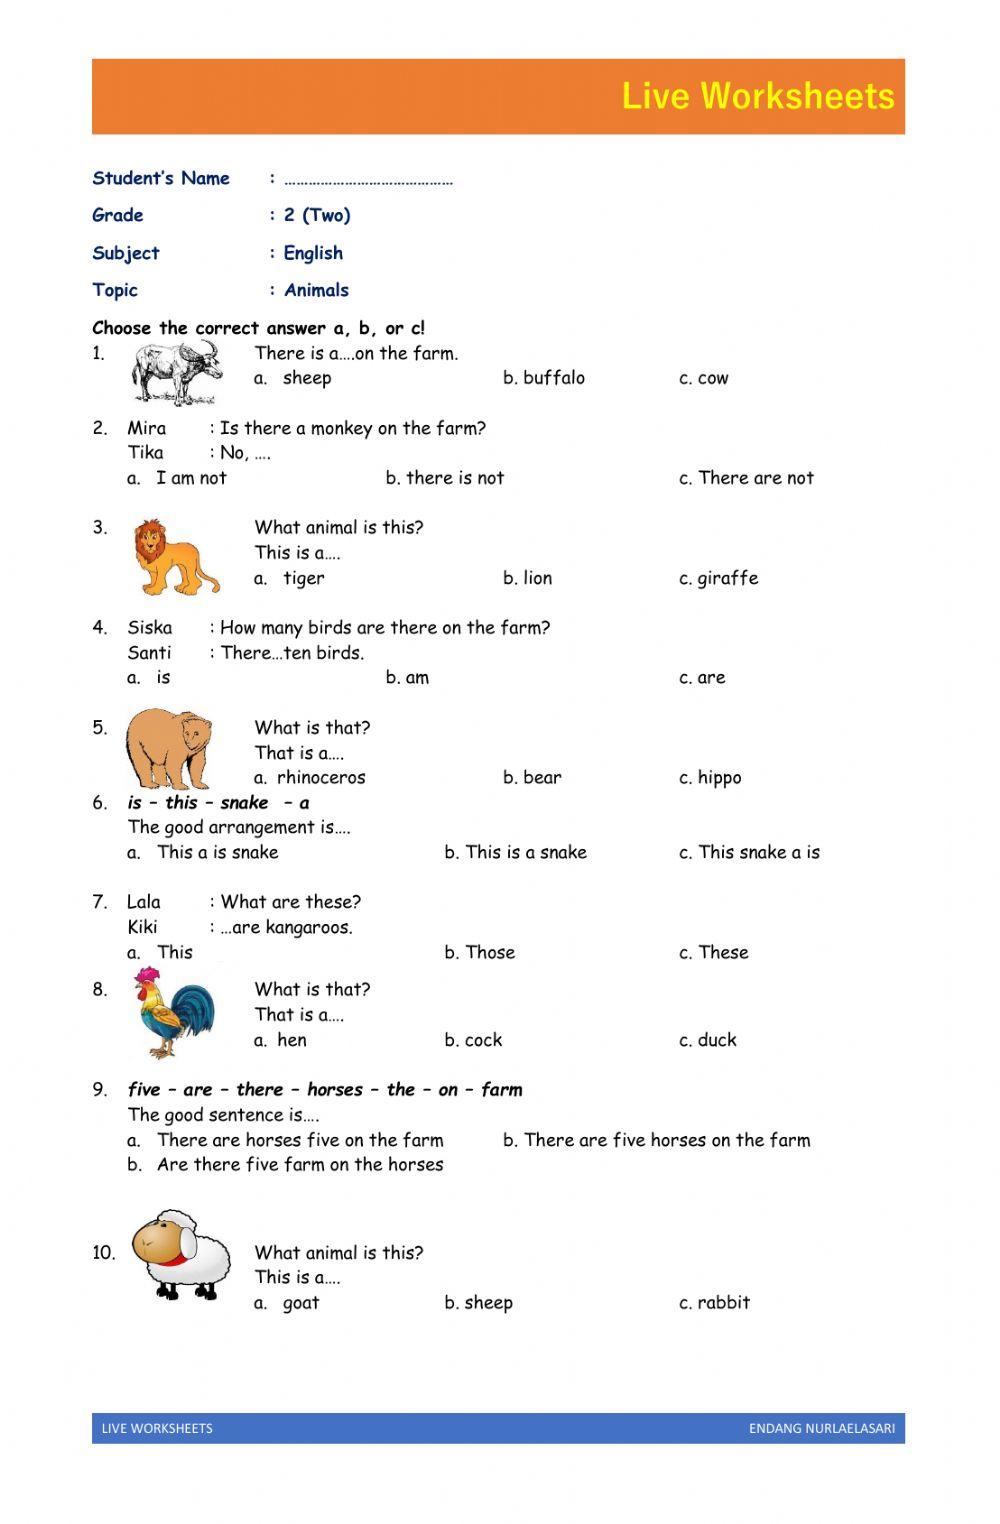 English Live Worksheet about Animals